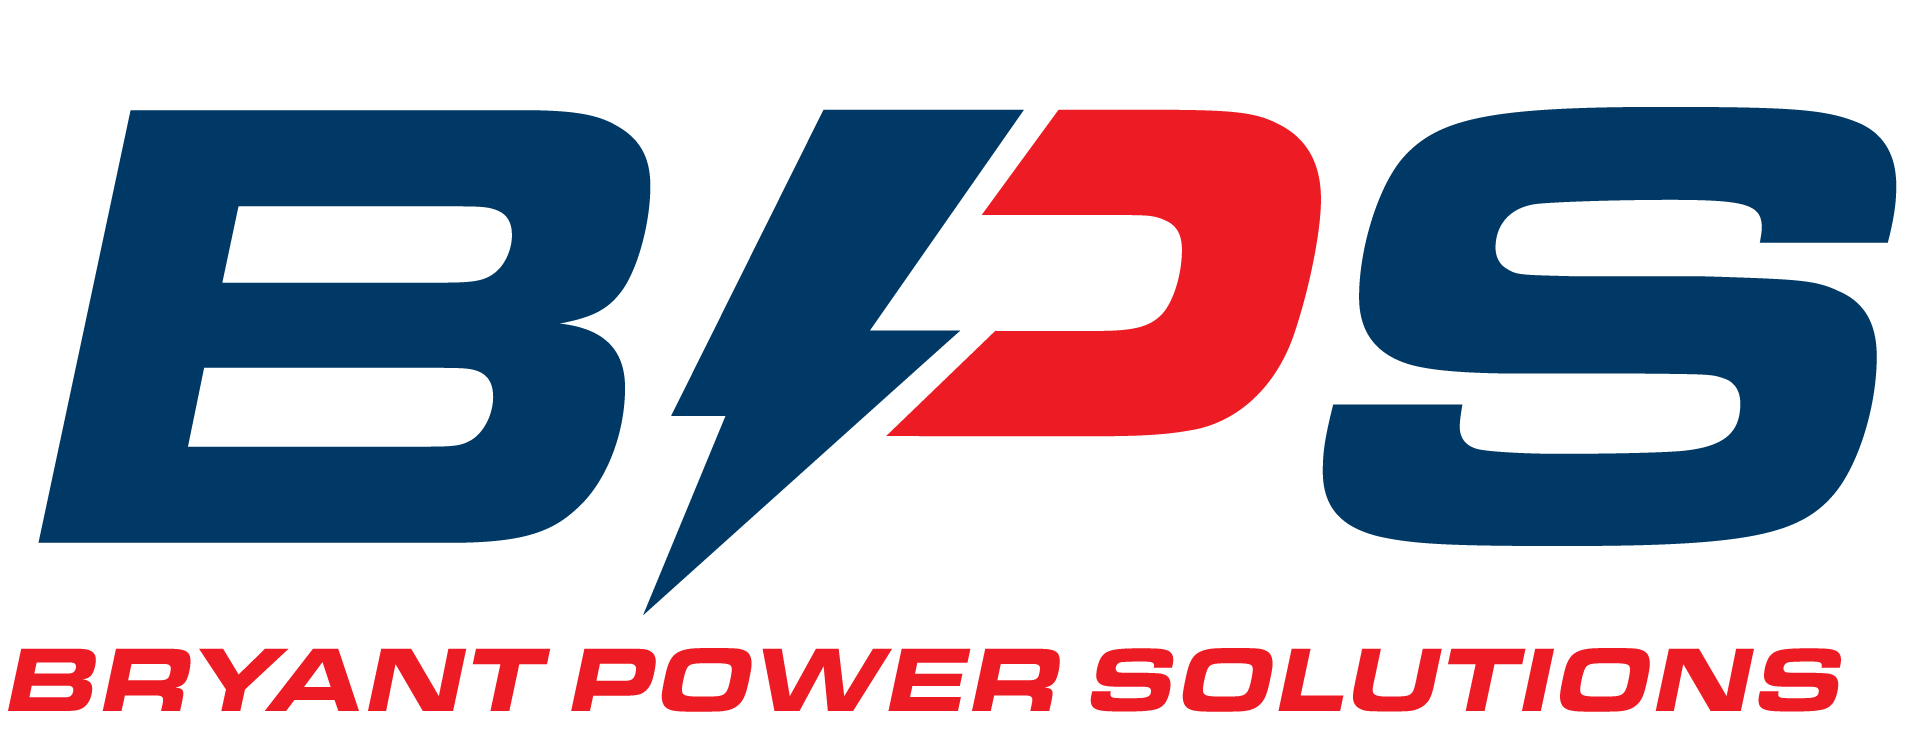 Bryant Power Solutions